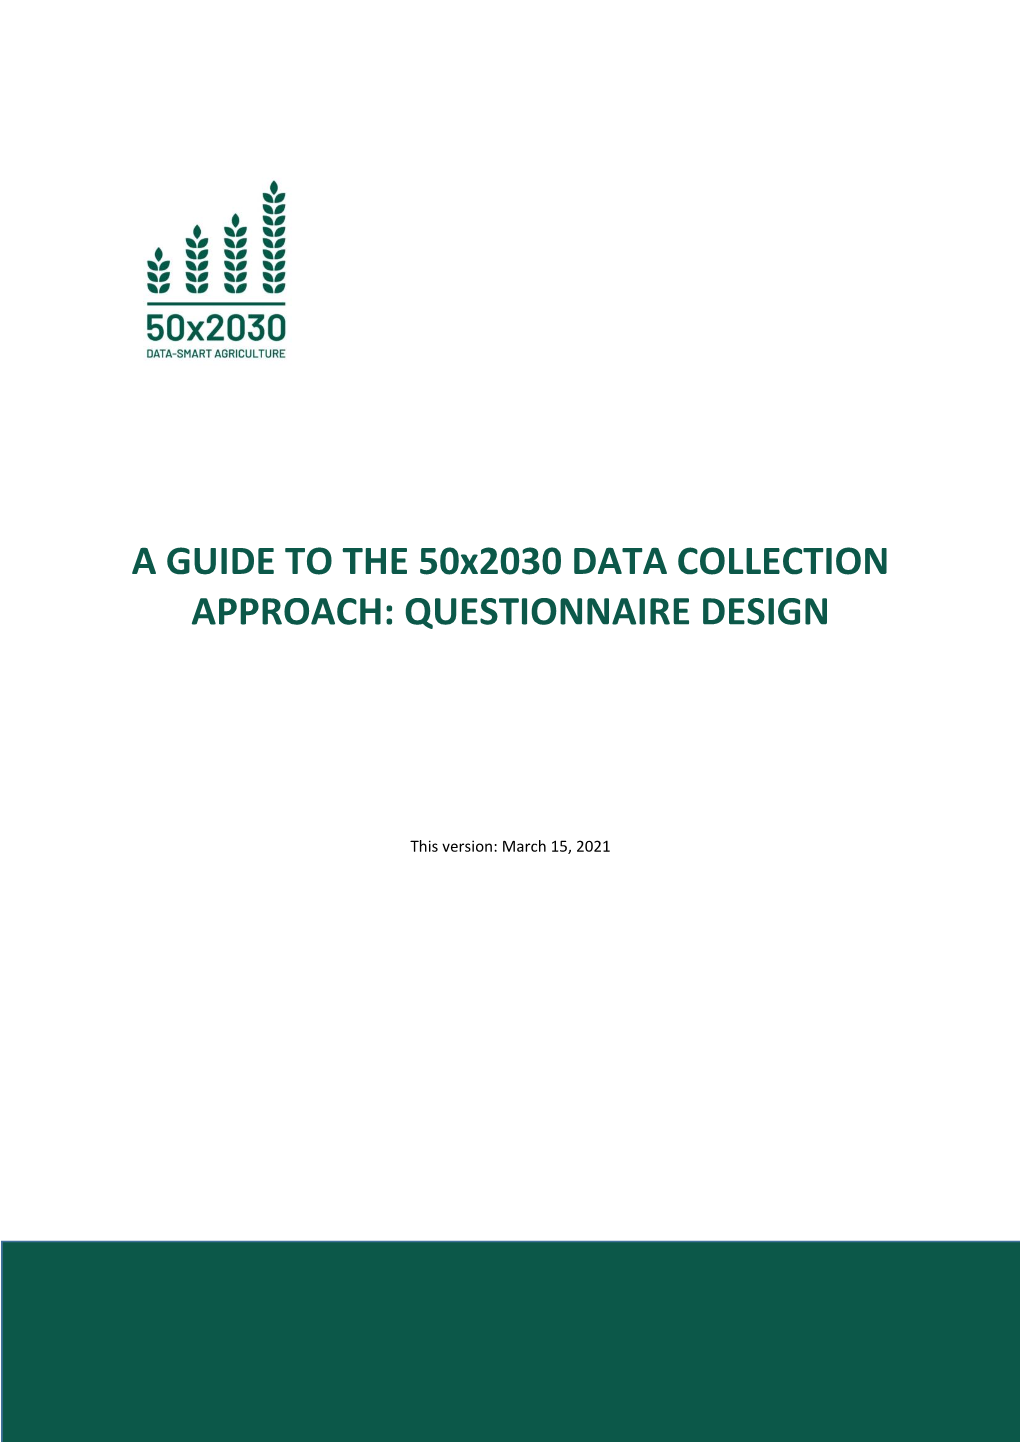 A GUIDE to the 50X2030 DATA COLLECTION APPROACH: QUESTIONNAIRE DESIGN